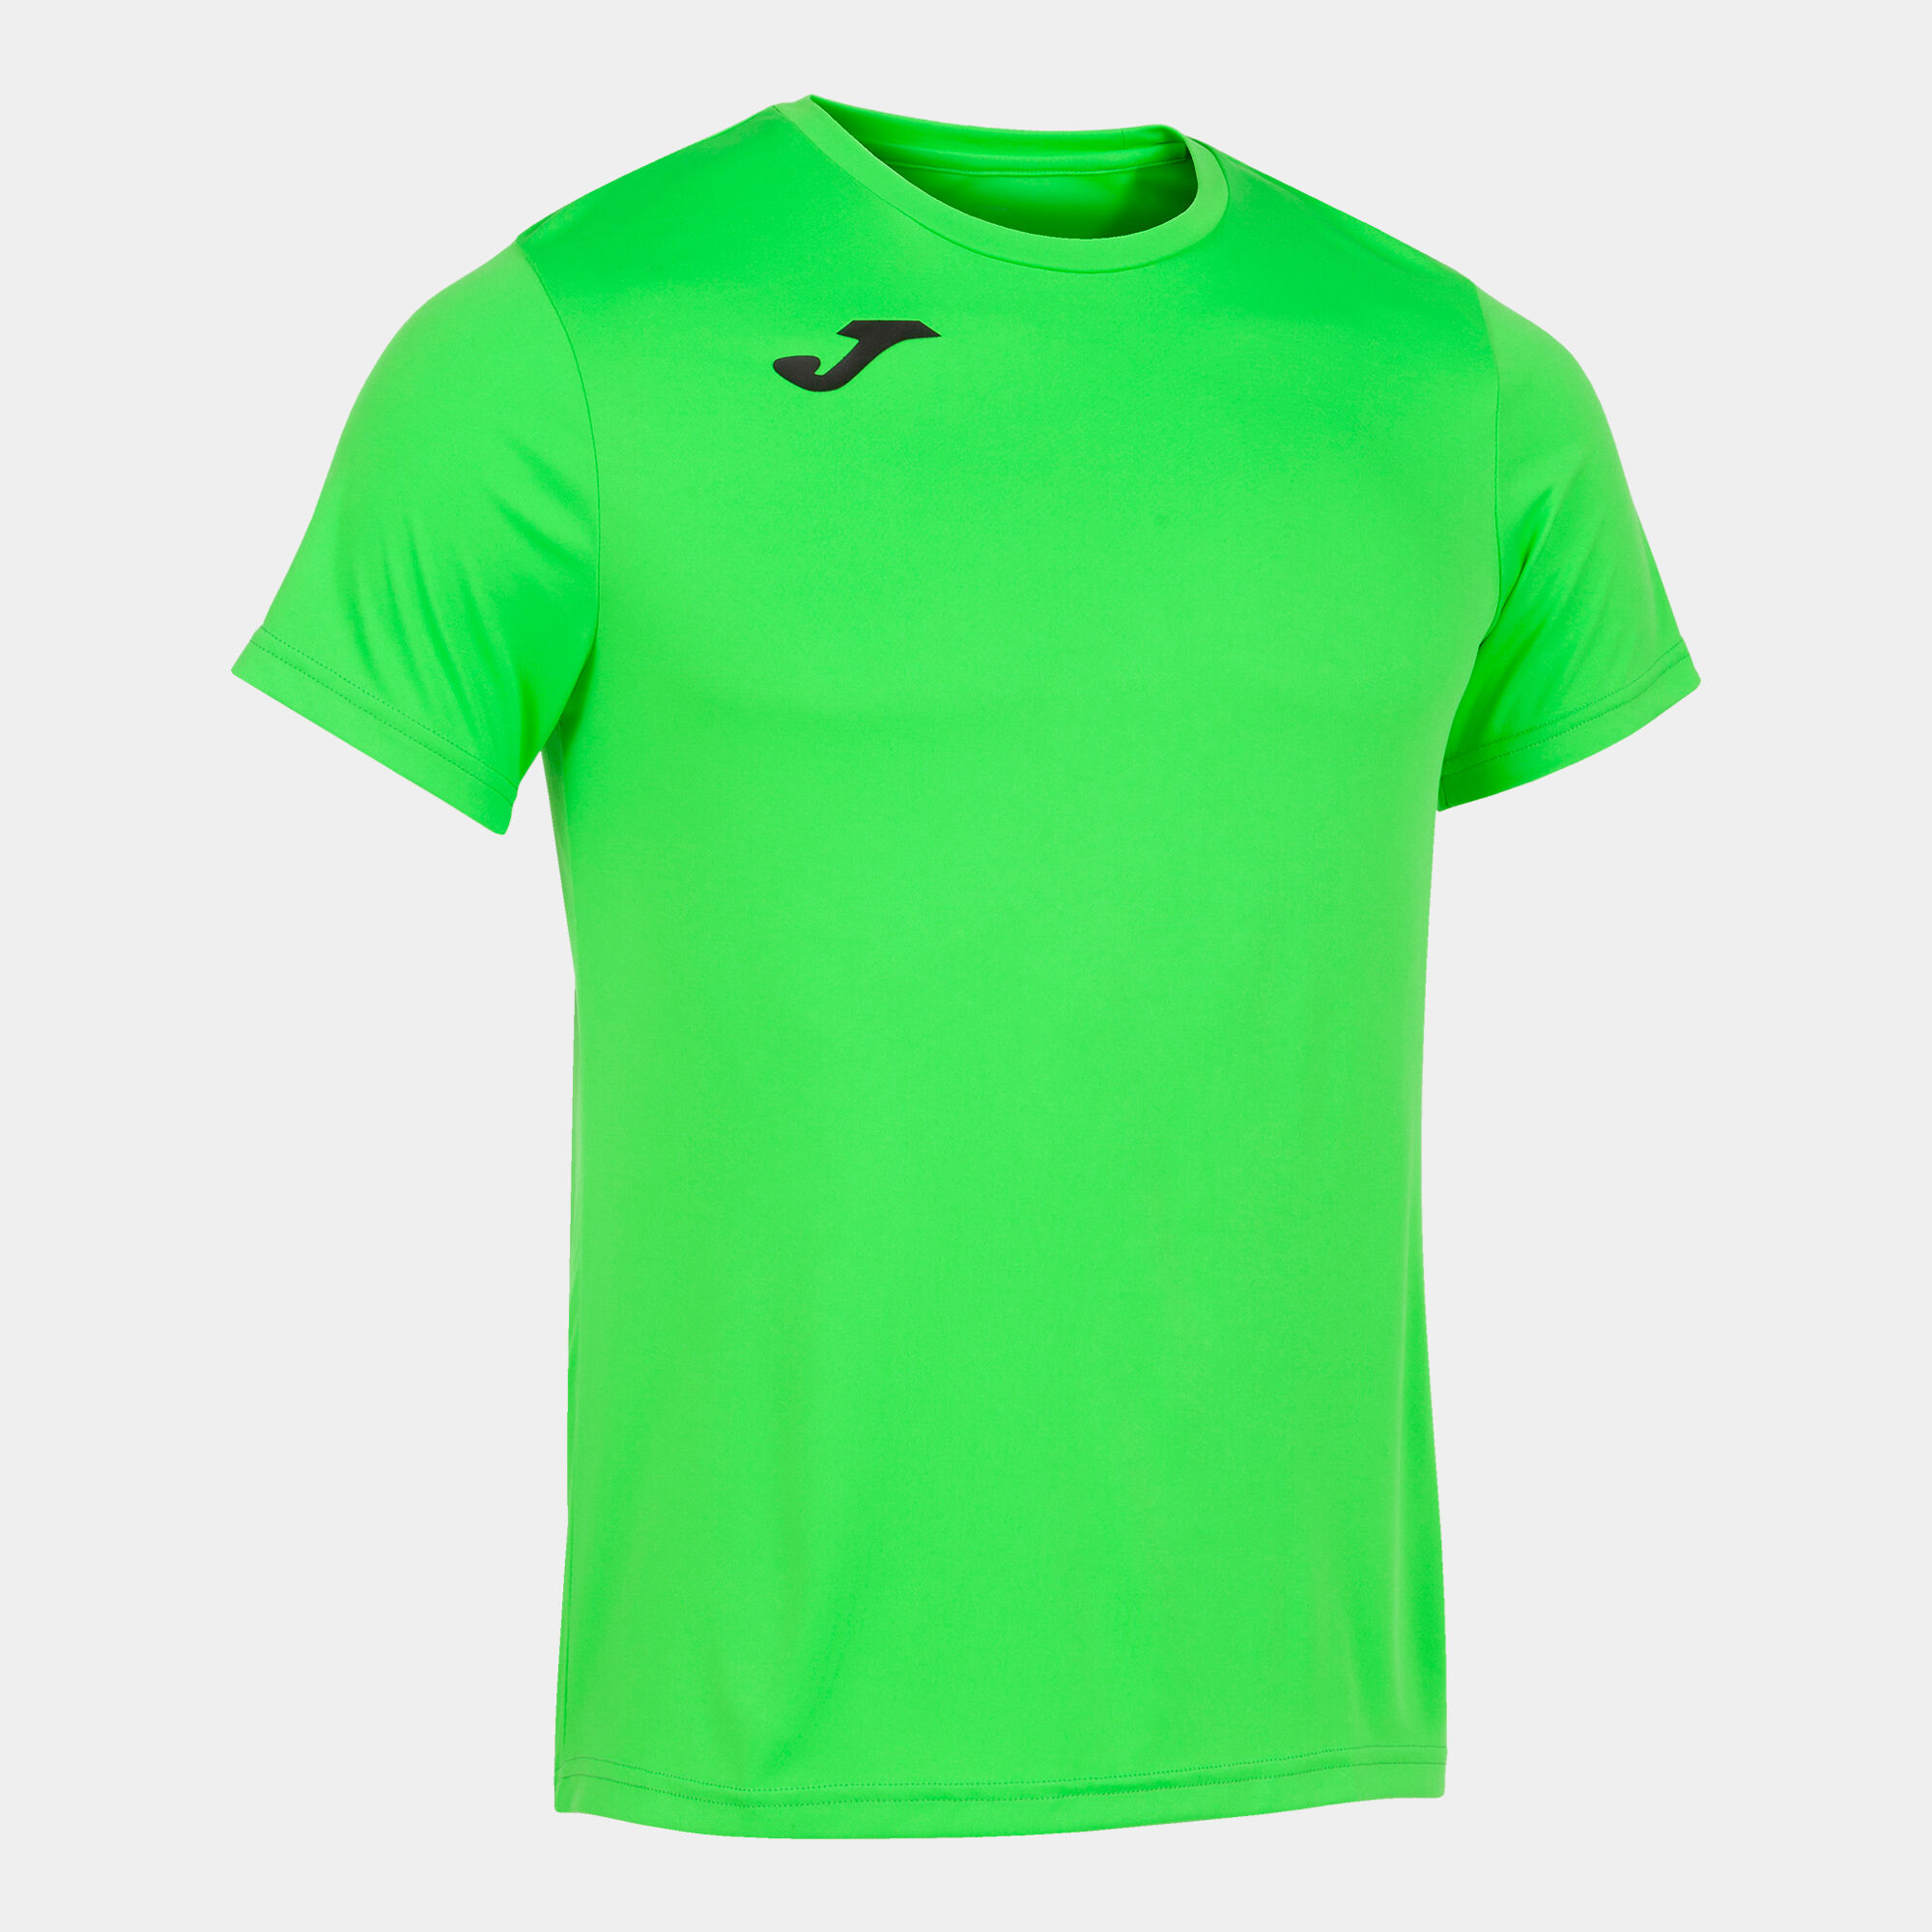 MAILLOT MANCHES COURTES HOMME RECORD II VERT FLUO